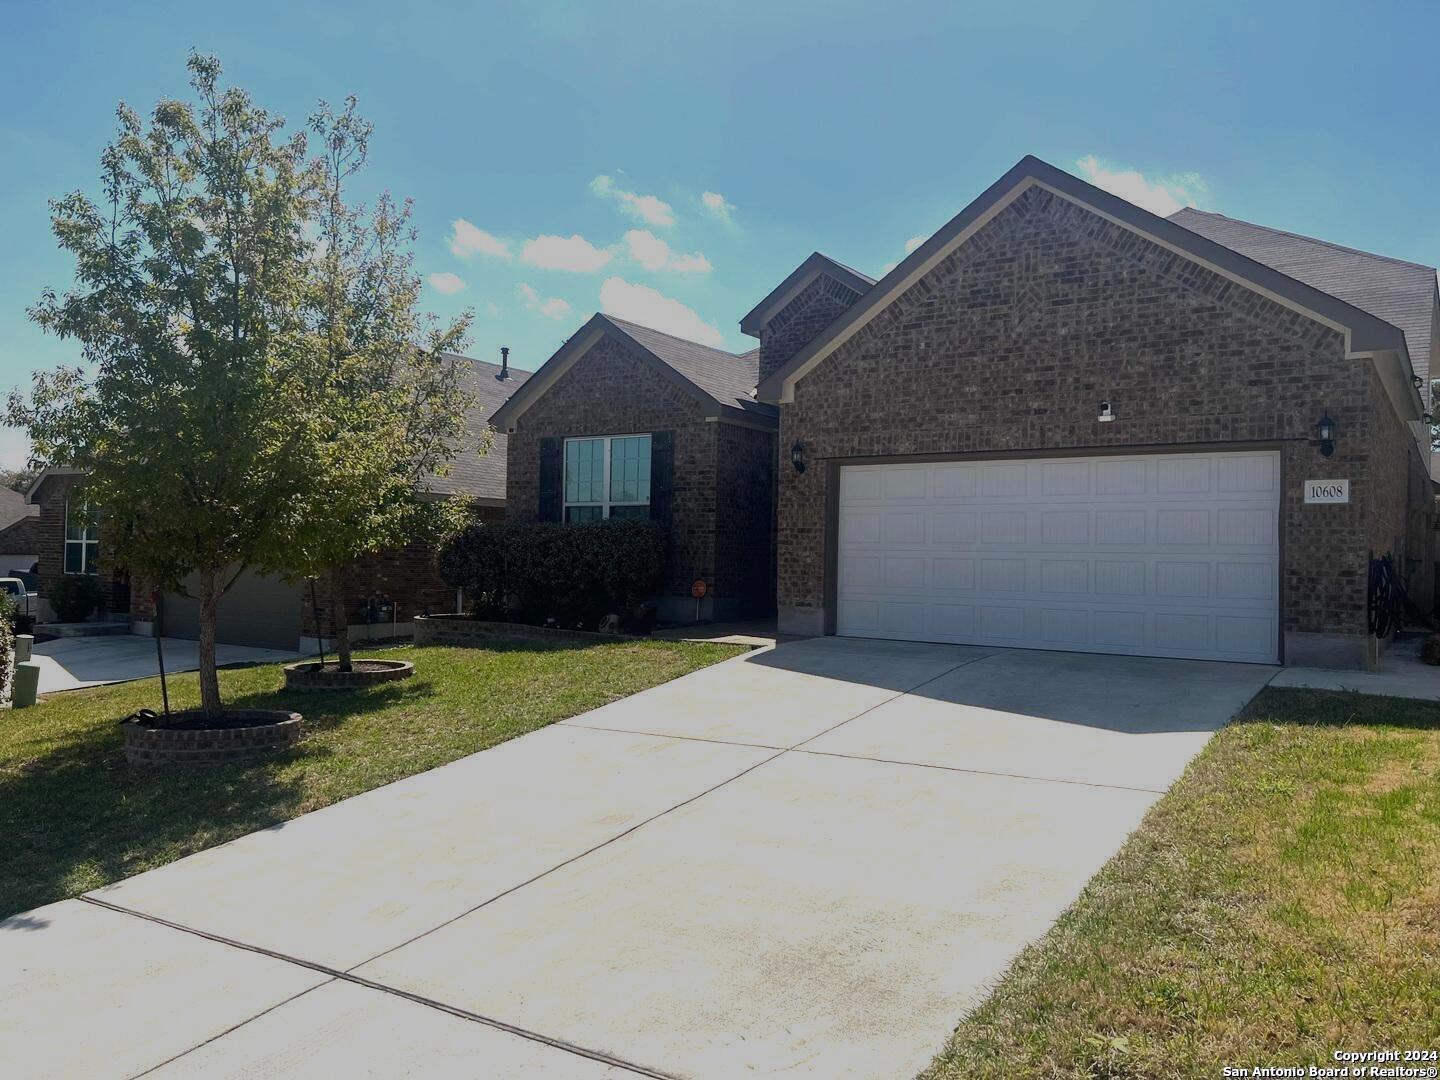 Photo of 10608 Hibiscus Cv in Helotes, TX